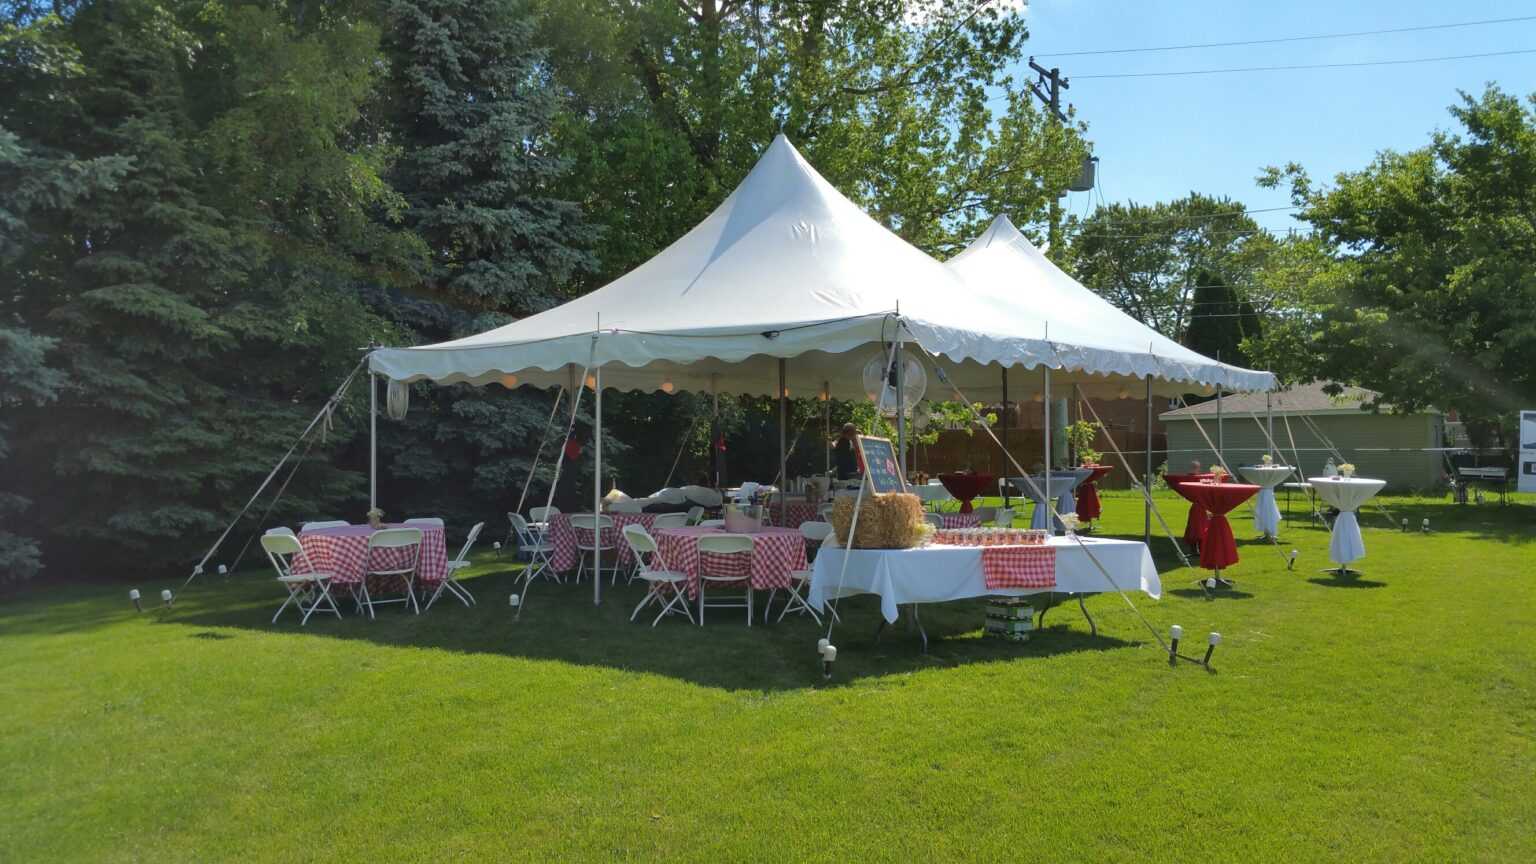 9 Awesome Outdoor Birthday Party Ideas For Adults Indestructo Party Rental